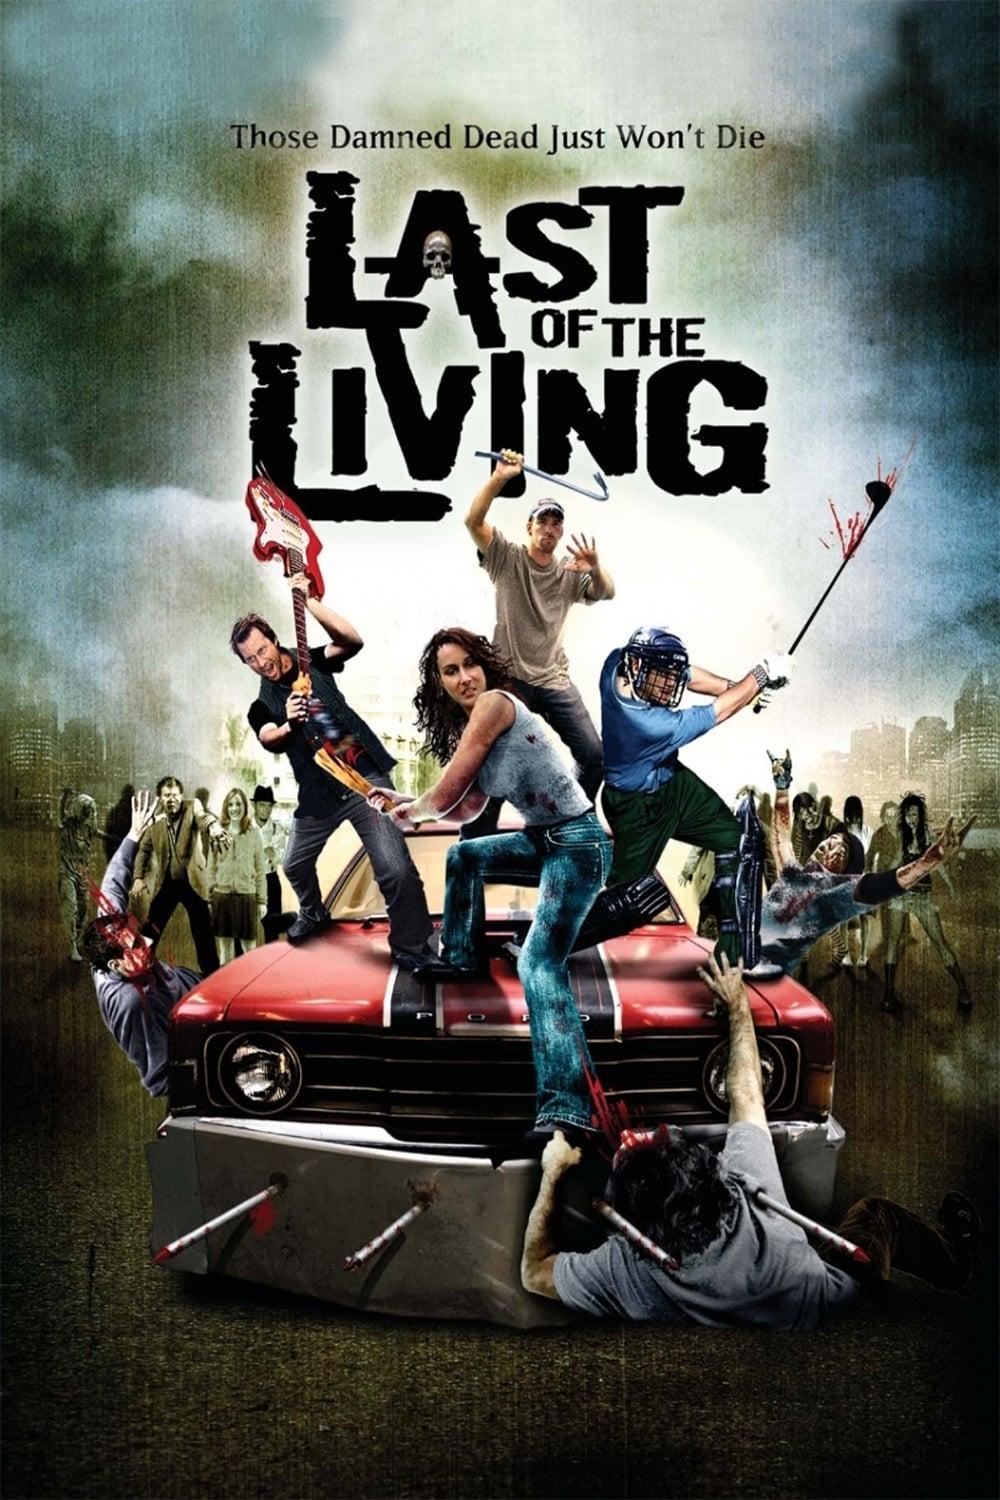 Last of the Living poster